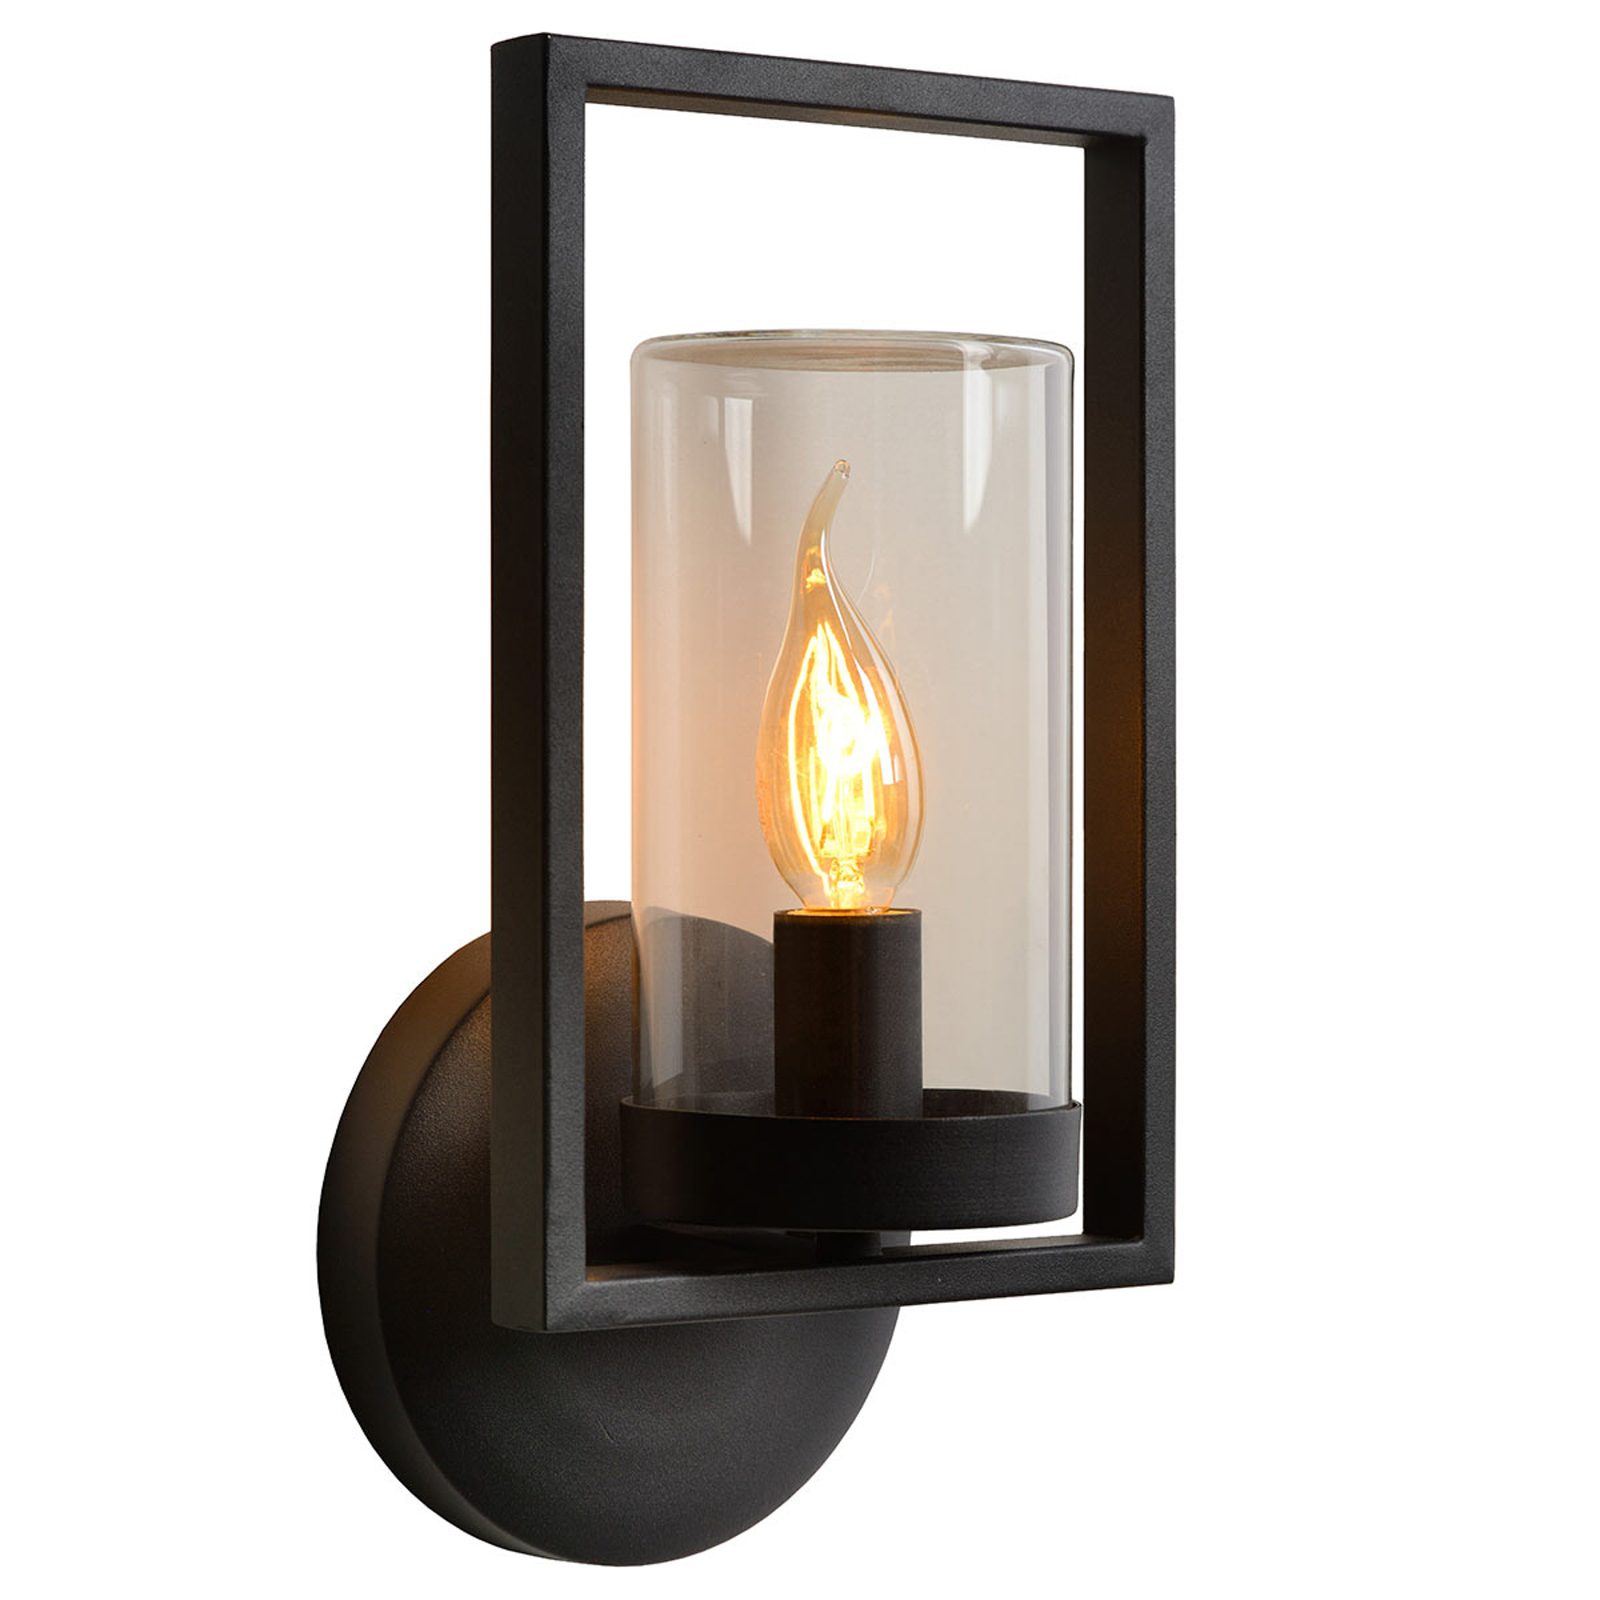 Nispen outdoor wall light with metal frame